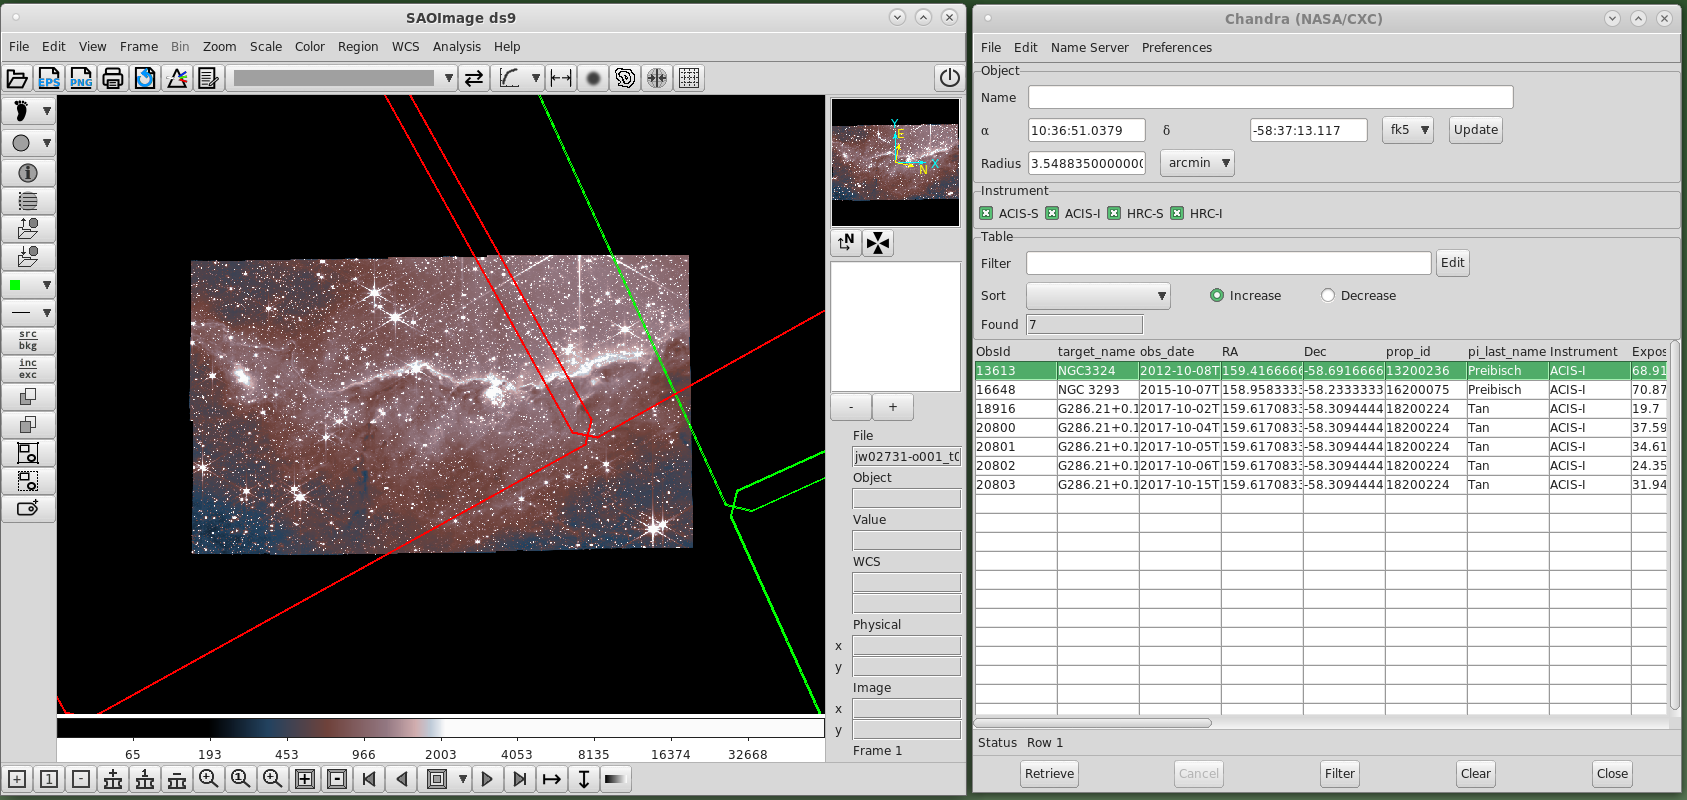 A screenshot showing SAOImageDS9 and an associated Chandra footprint viewer. The DS9 window shows an image of the sky, where a narrow ridge of gas highlights a broader structure of diffuse emission, with numerous stars and galaxies dotting the background.Large red and green squares are overplotted, with sizes much larger than the displayed image. In the footprint window, celestial coordinates are displayed in a query form at the top and seven observations are listed in a table below, specifying name, observation date, and coordinates, among other properties.